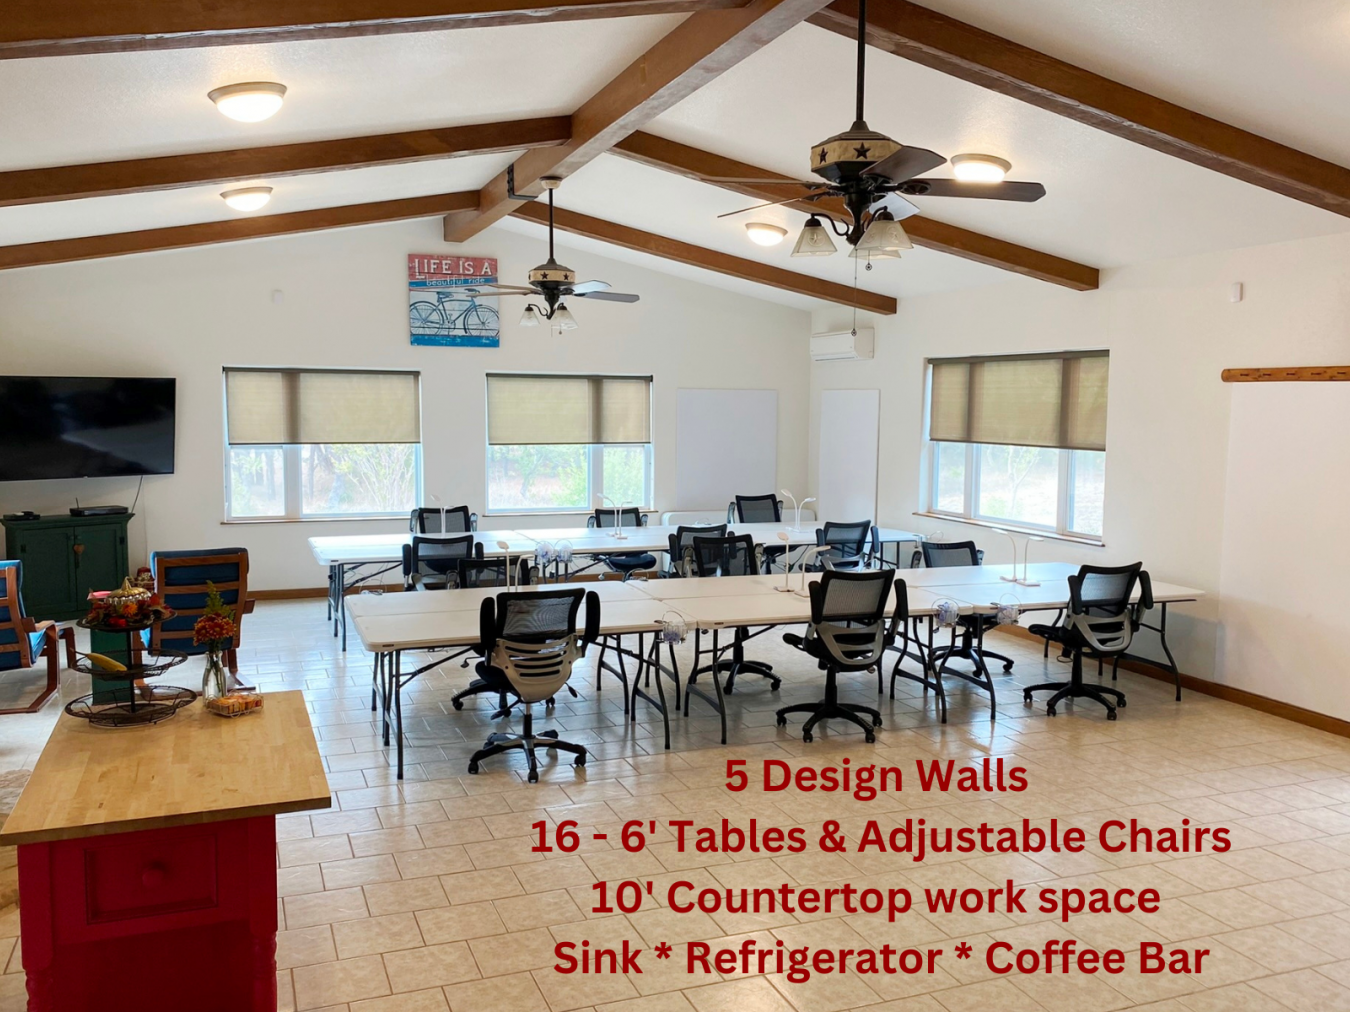 24-hour beverage bar and tables for retreats, conferences and weddings.